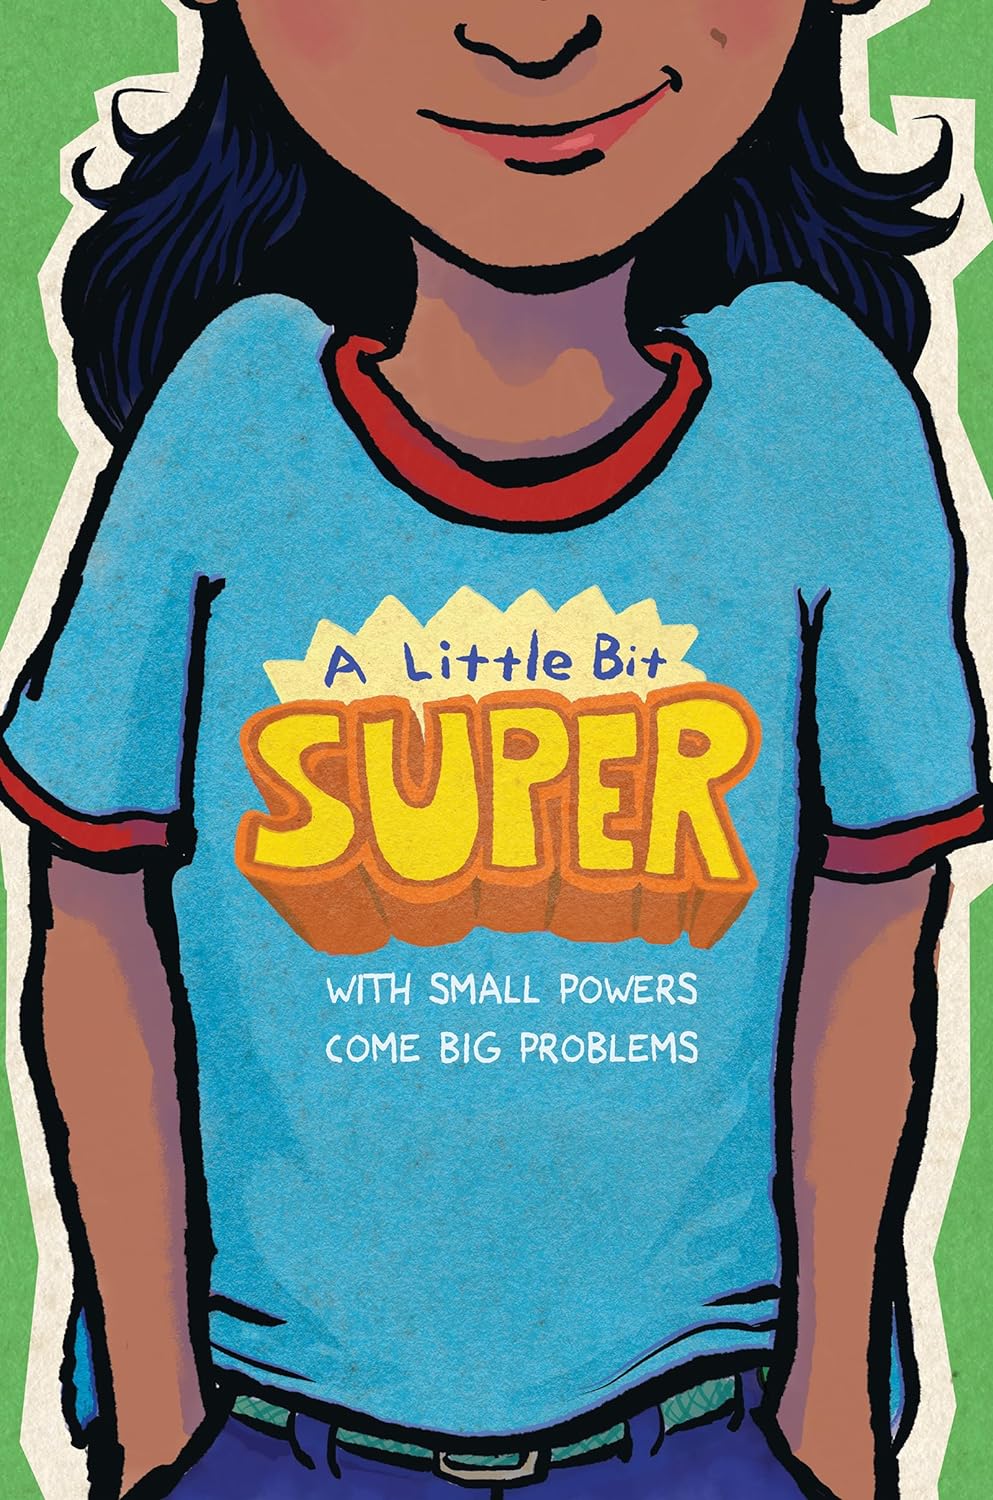 A Little Bit Super: With Small Powers Come Big Problems by Leah Henderson